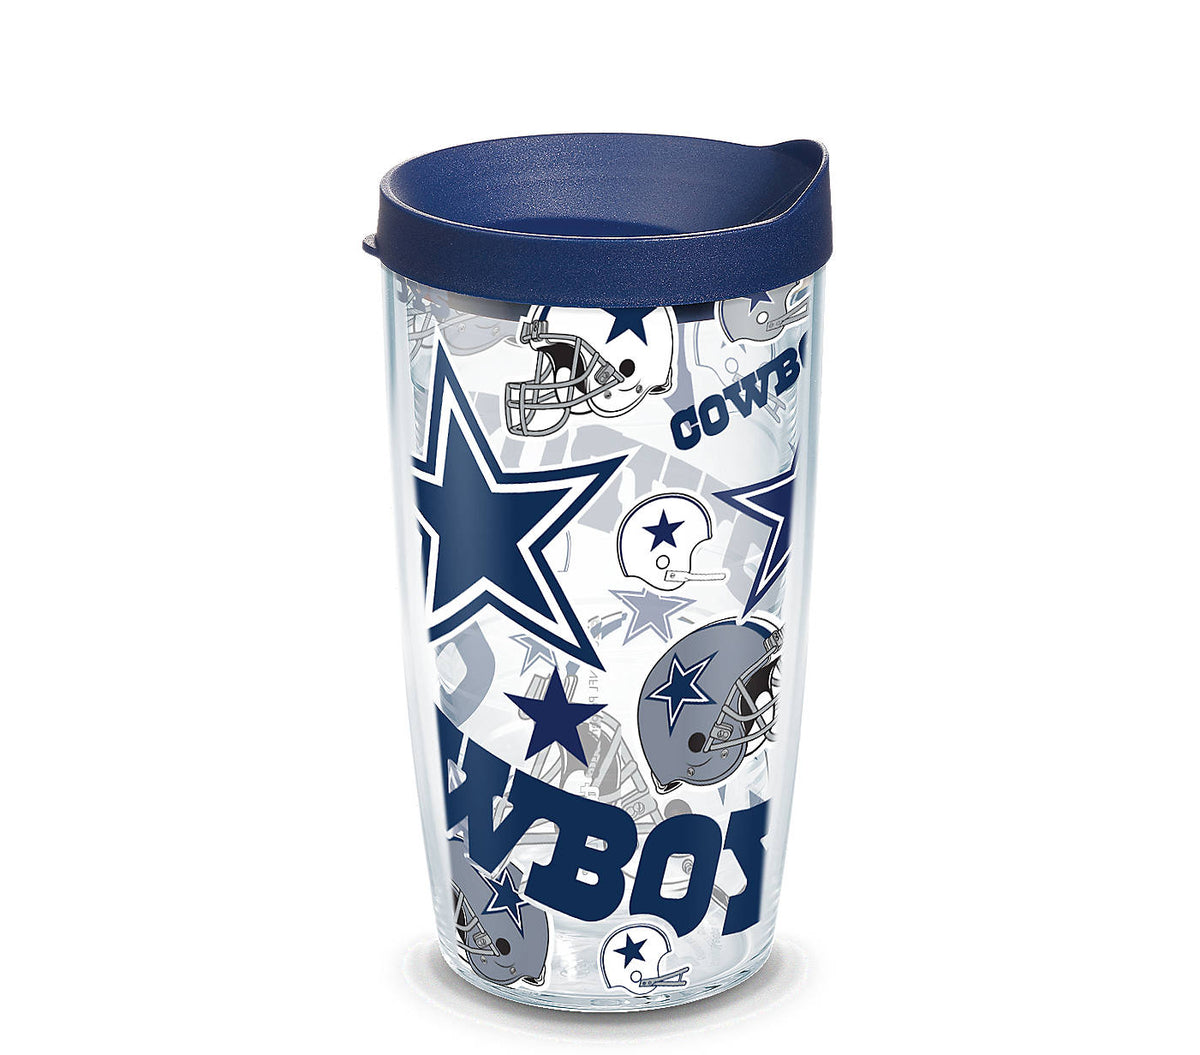 Officially Licensed NFL Tervis Tumbler Insulated Cups - 4-pack - Cowboys